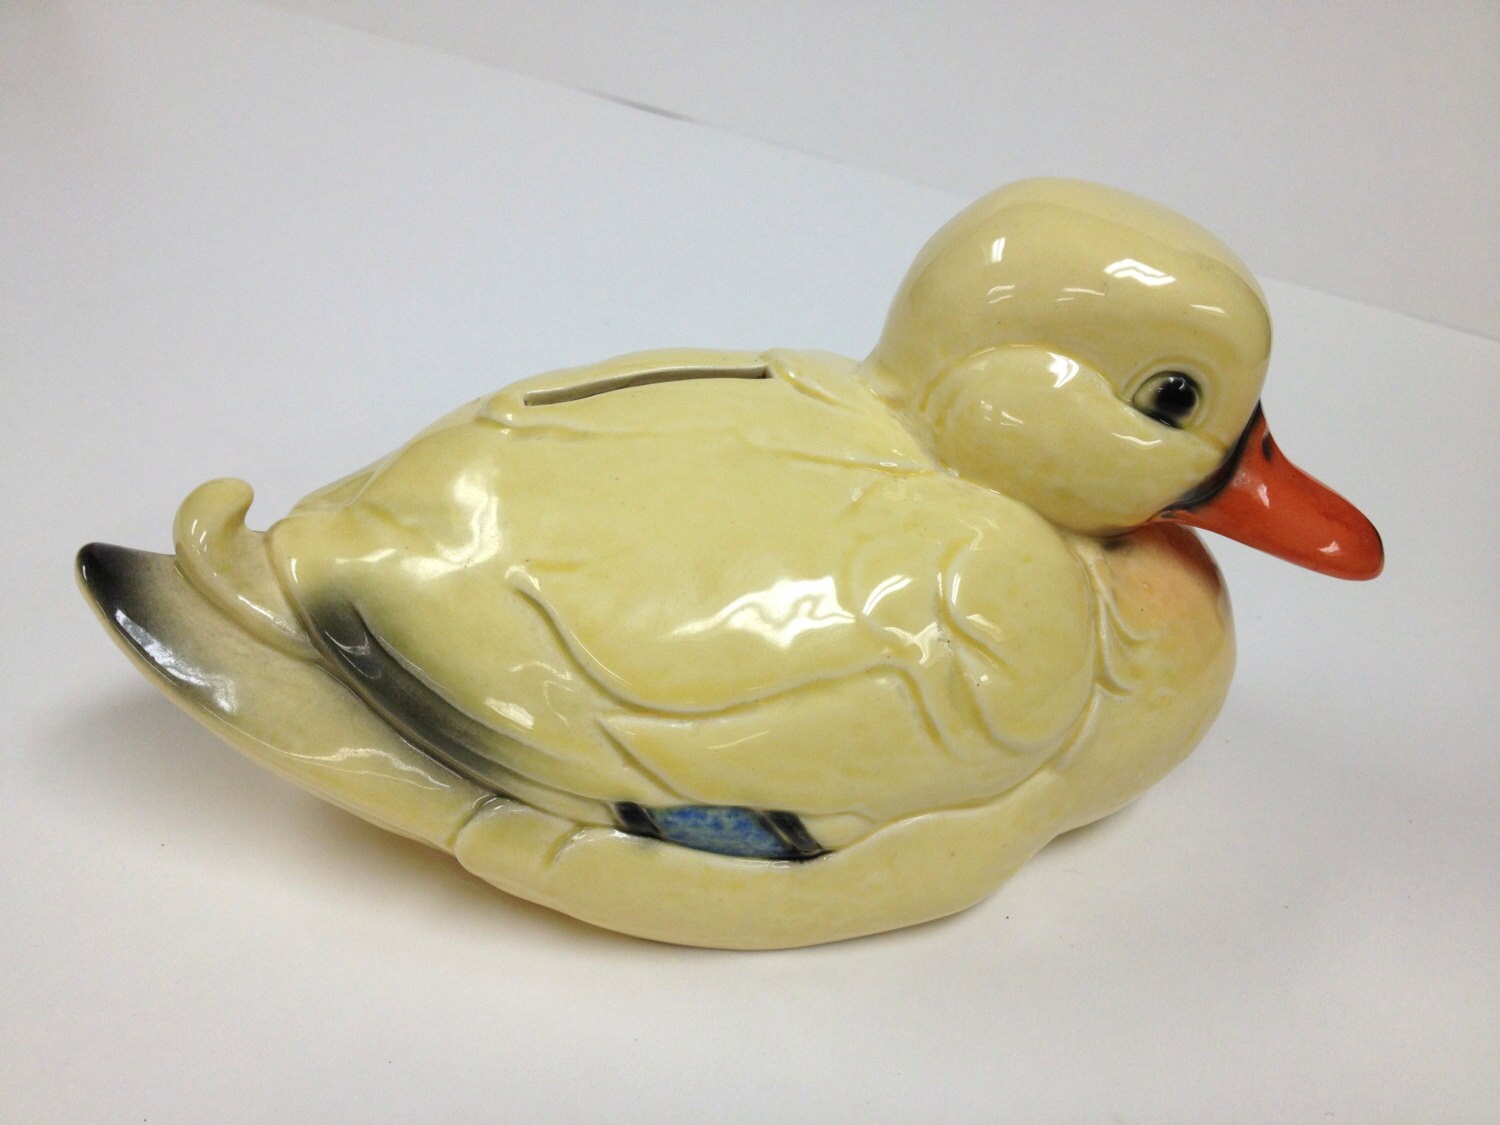 HOLD FOR LANDONVintage Goebel Duck Ceramic Coin Bank with